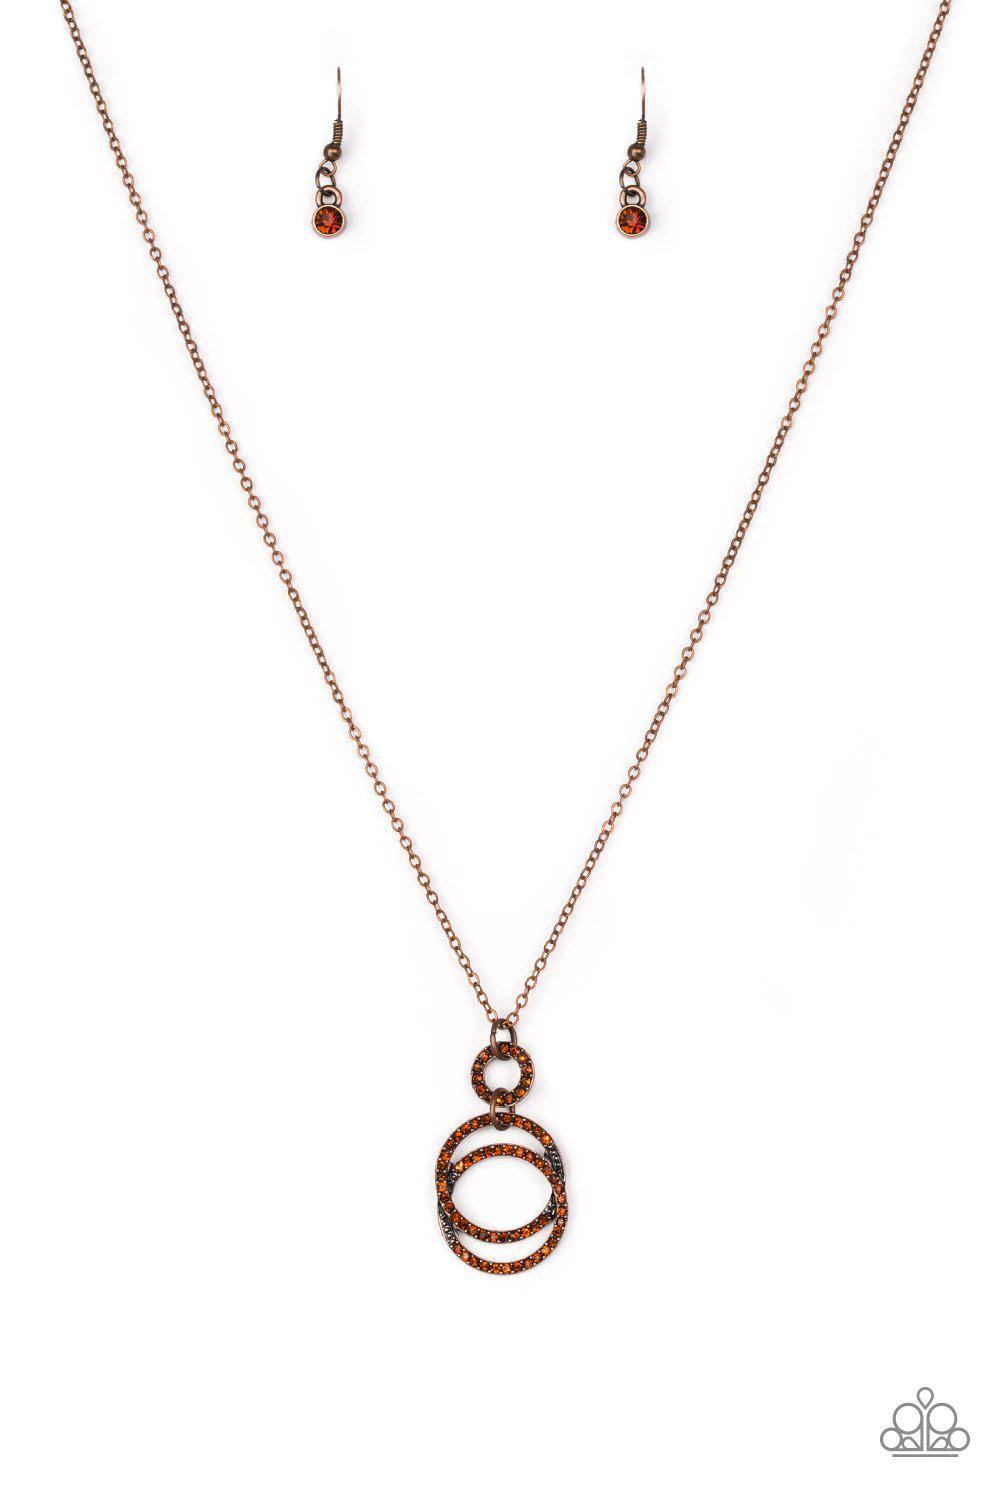 Timeless Trio Copper Necklace - Paparazzi Accessories- lightbox - CarasShop.com - $5 Jewelry by Cara Jewels